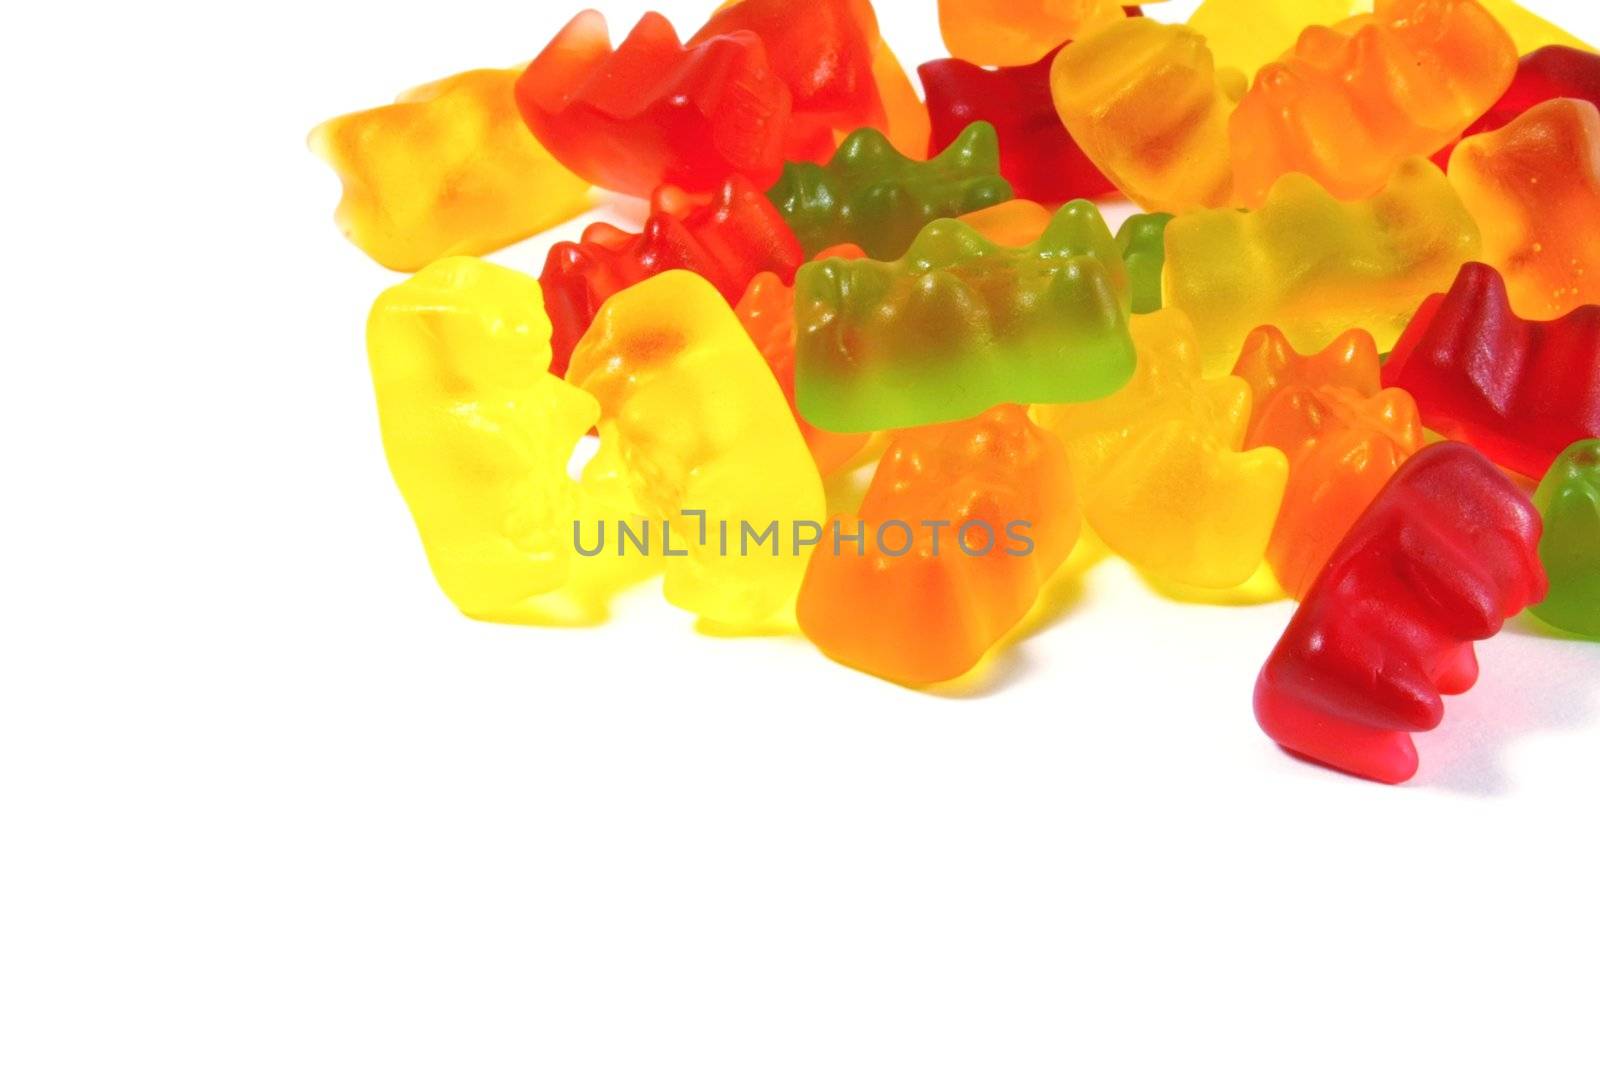 Gummi bears the ultimate candy snack for kids and children